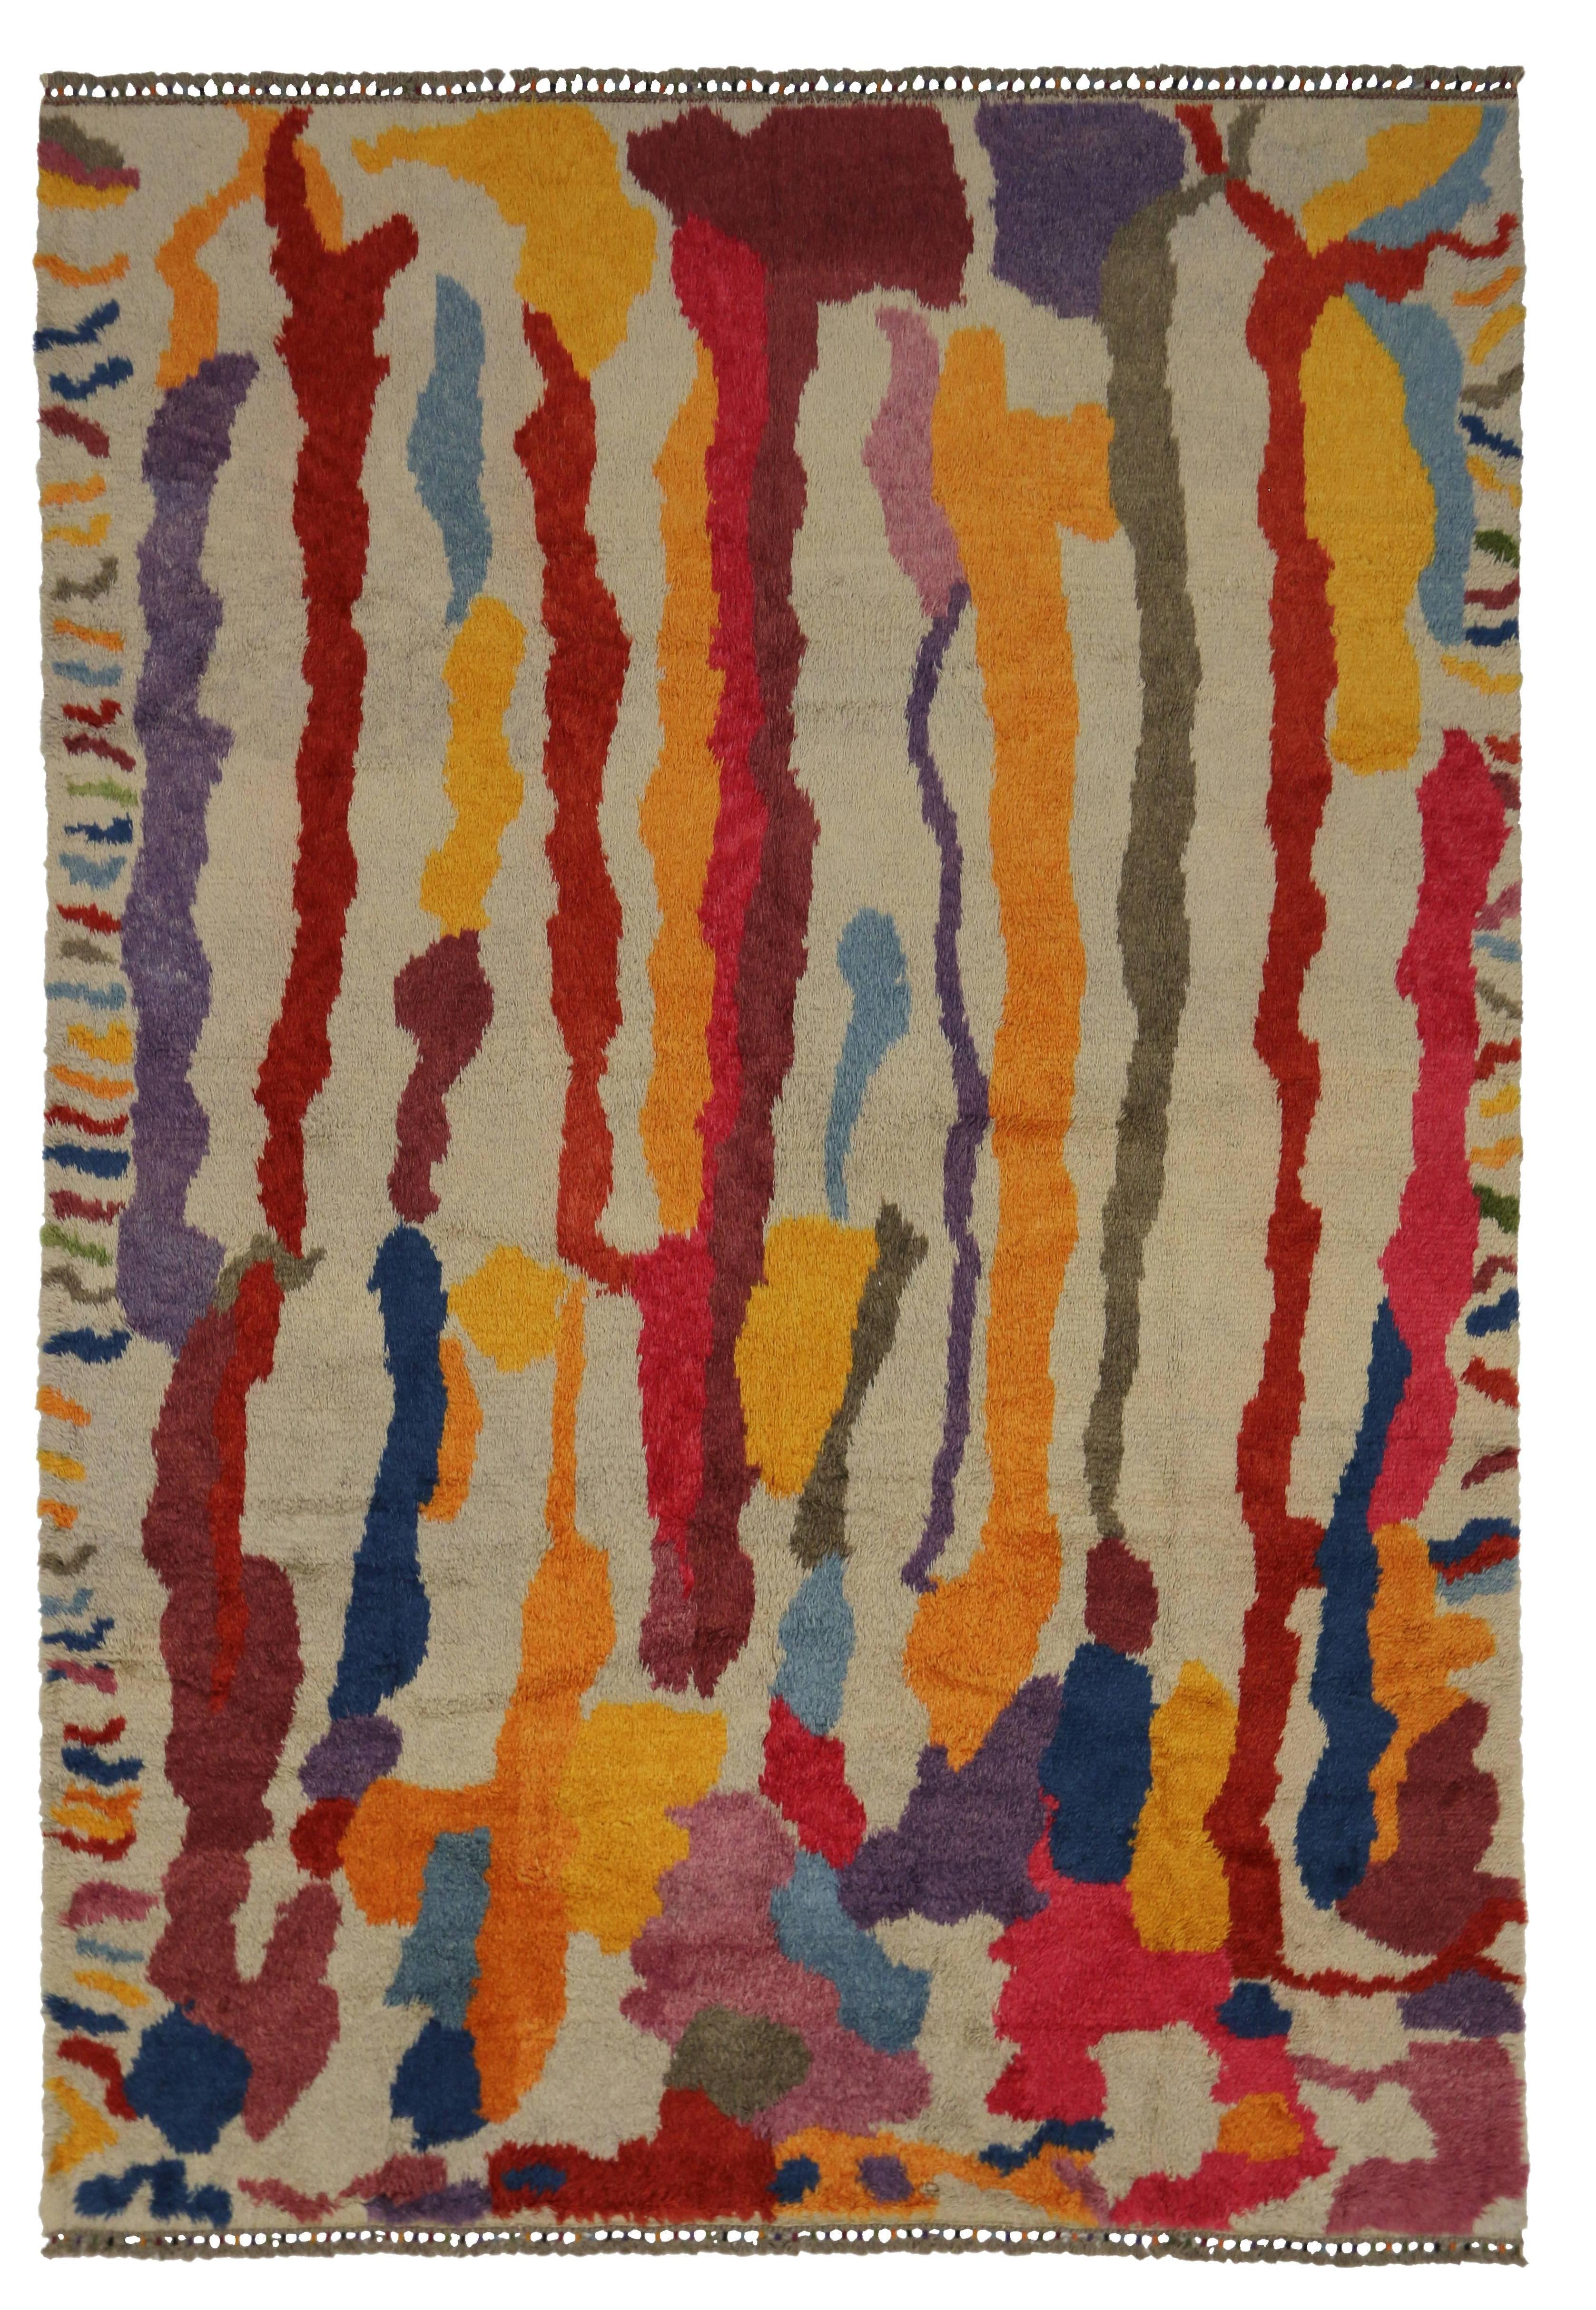 Modern Turkish Tulu Shag Rug with Contemporary Abstract Paint Drip Style 1